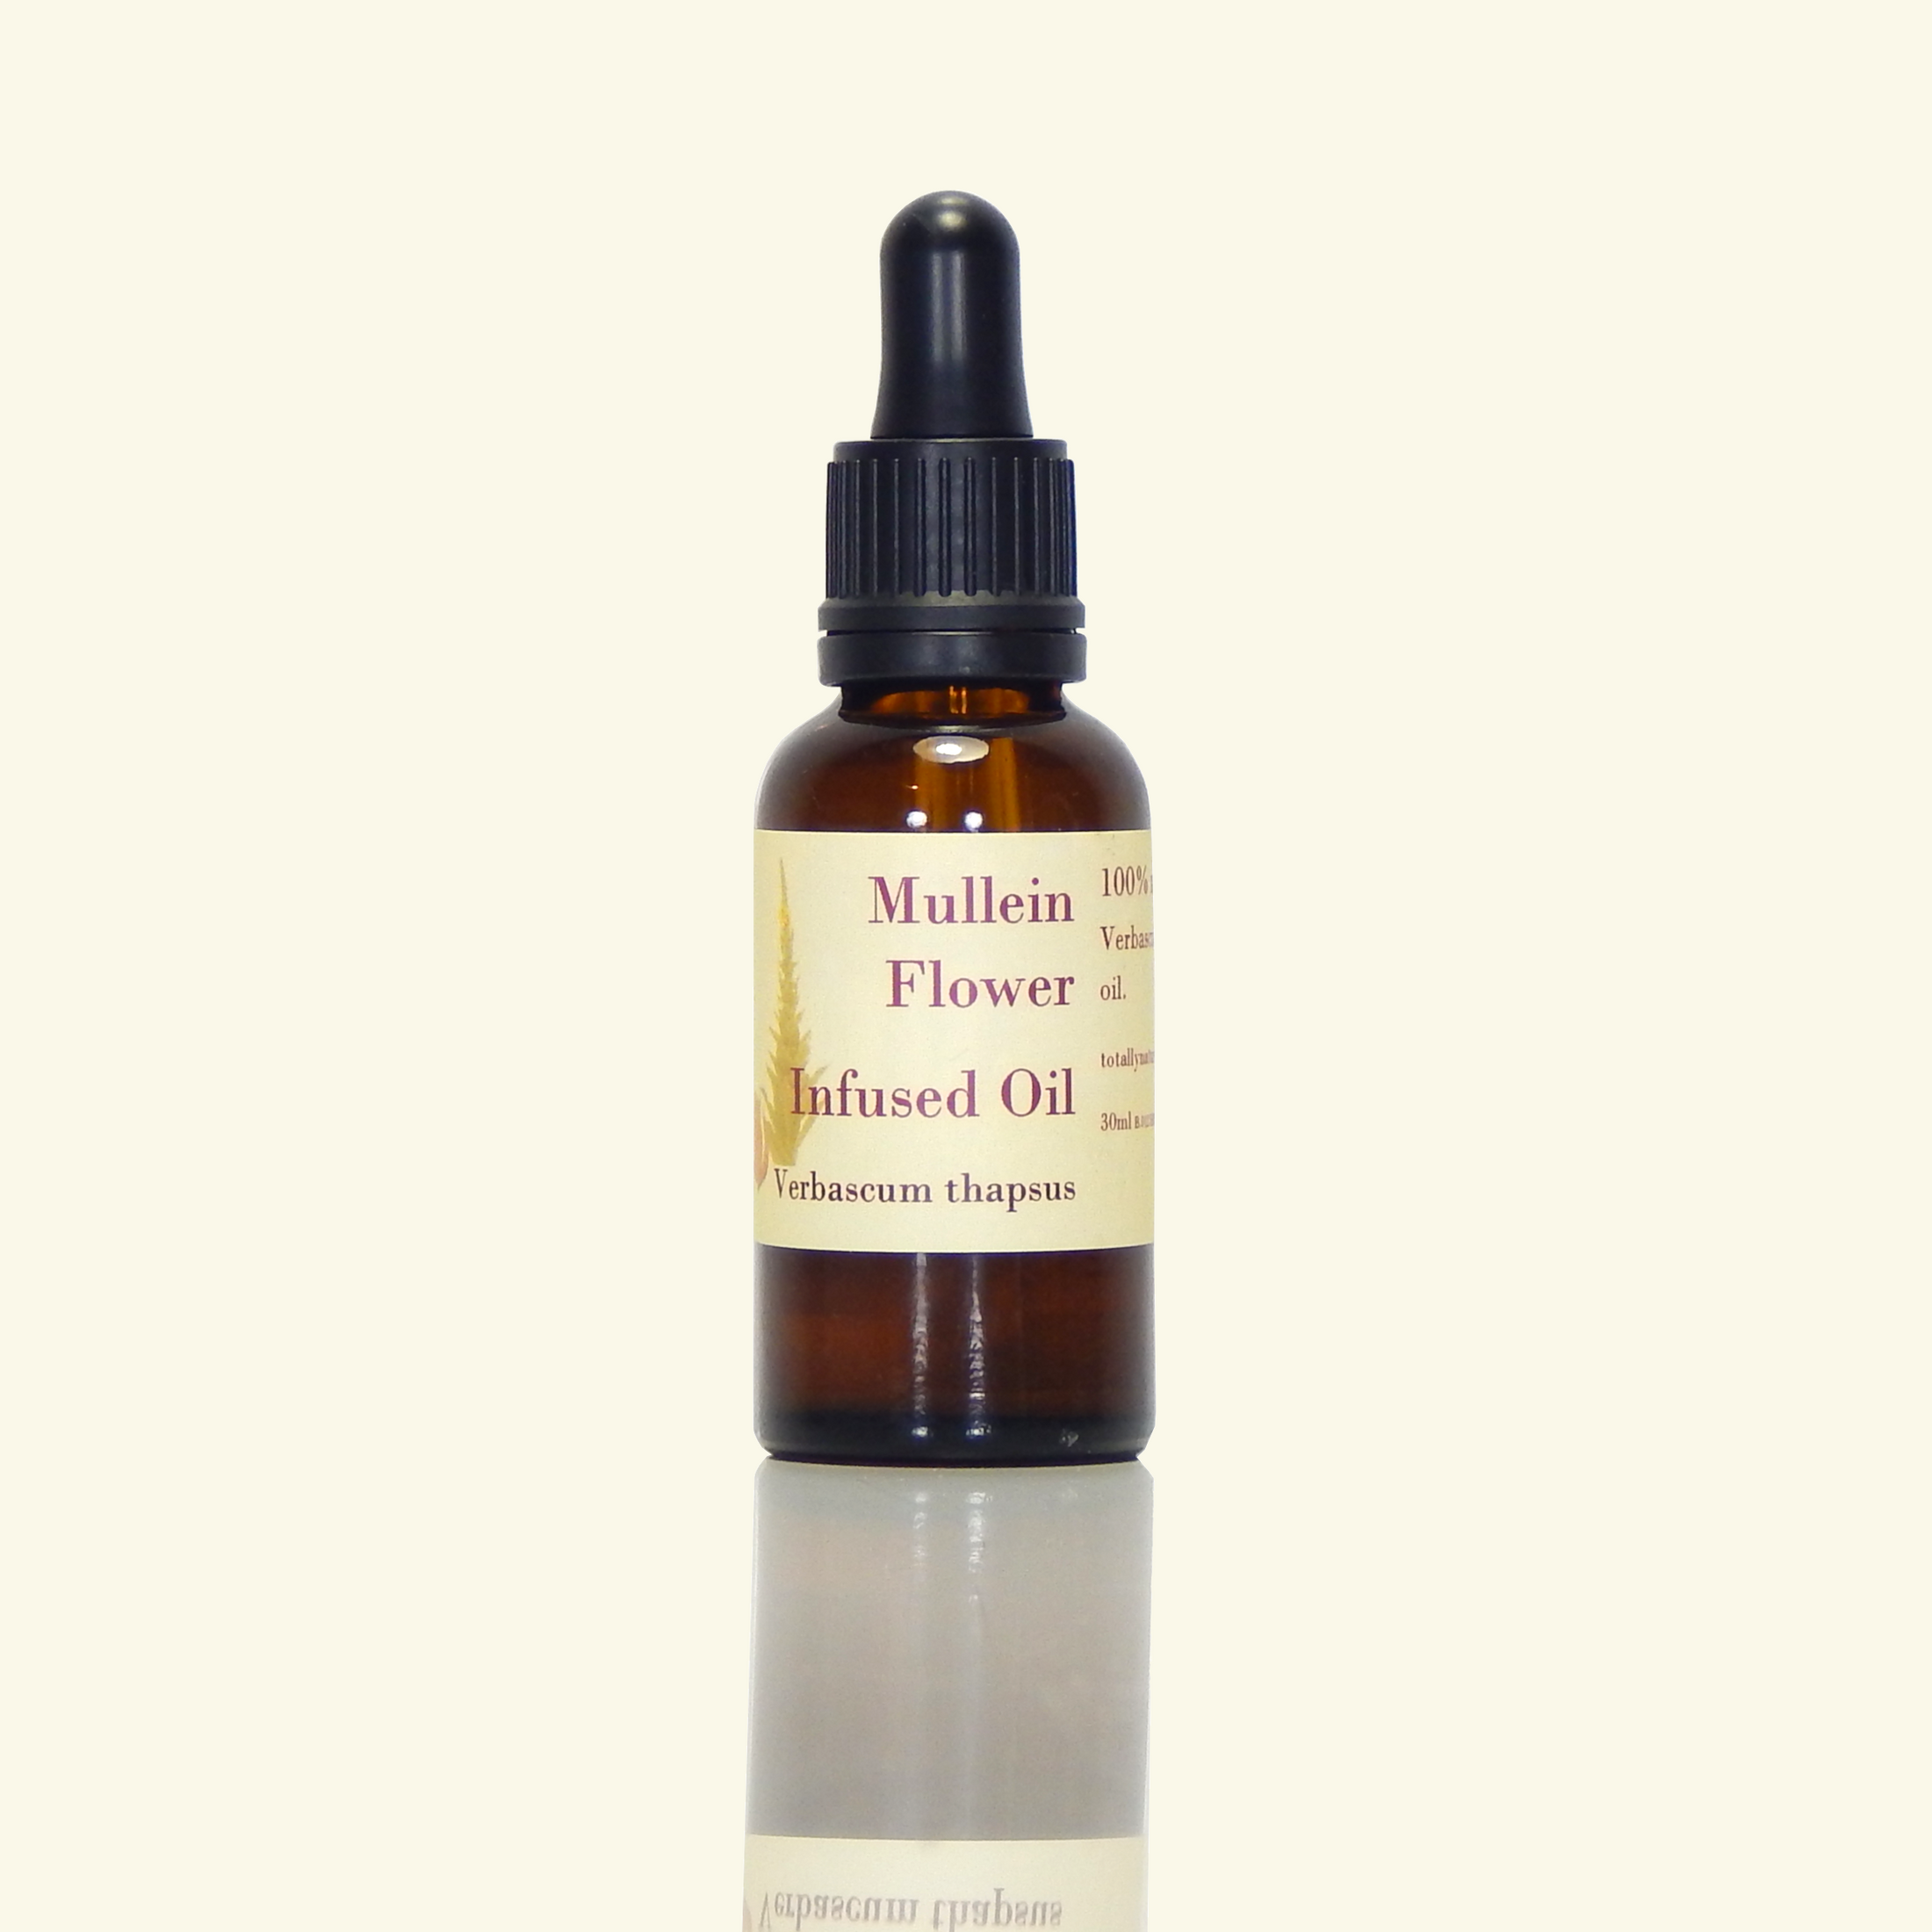 Mullein Flower Infused Oil